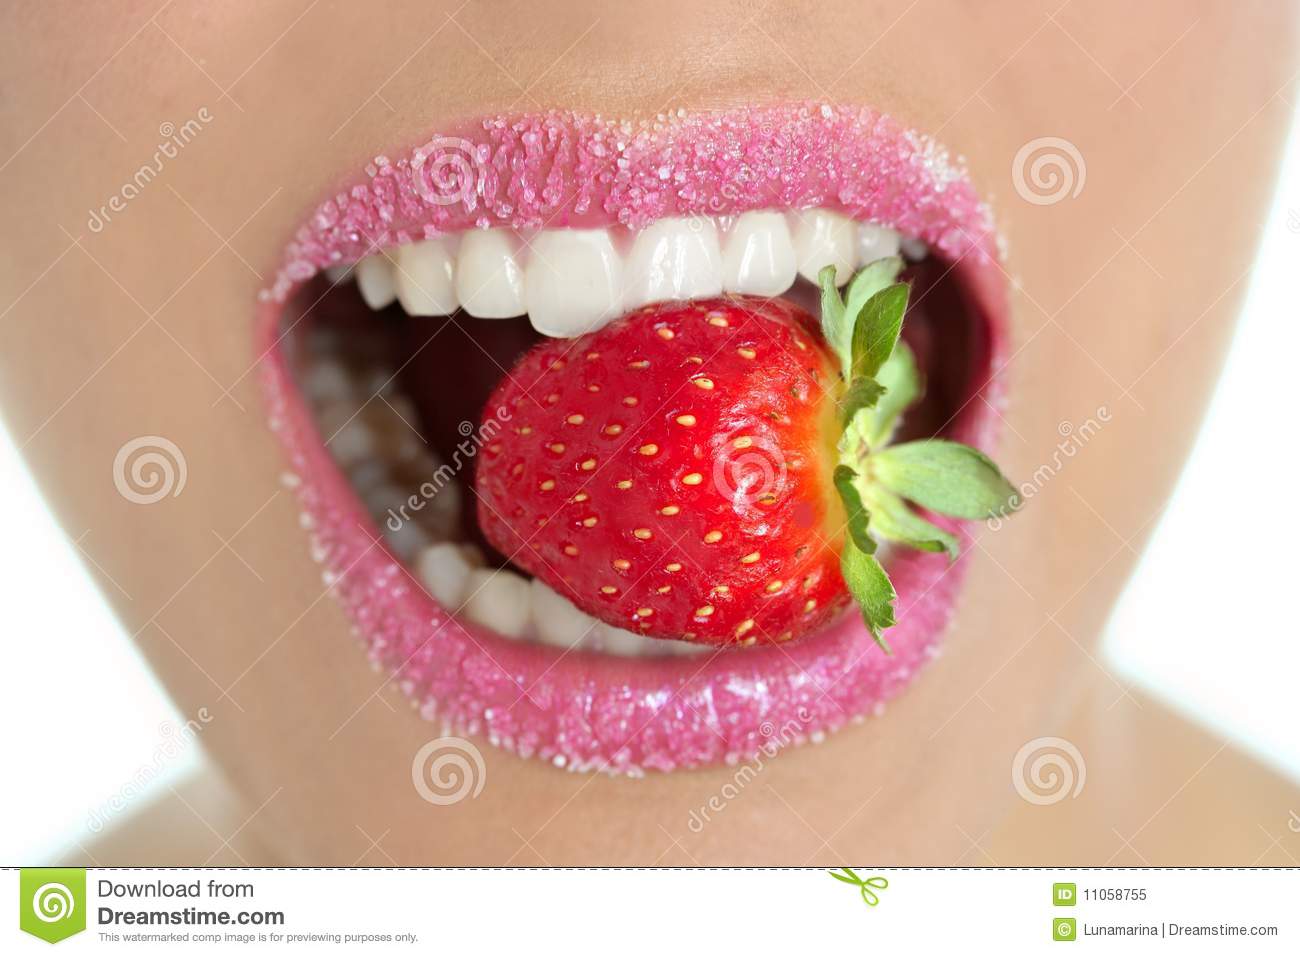 Fruit Mouth